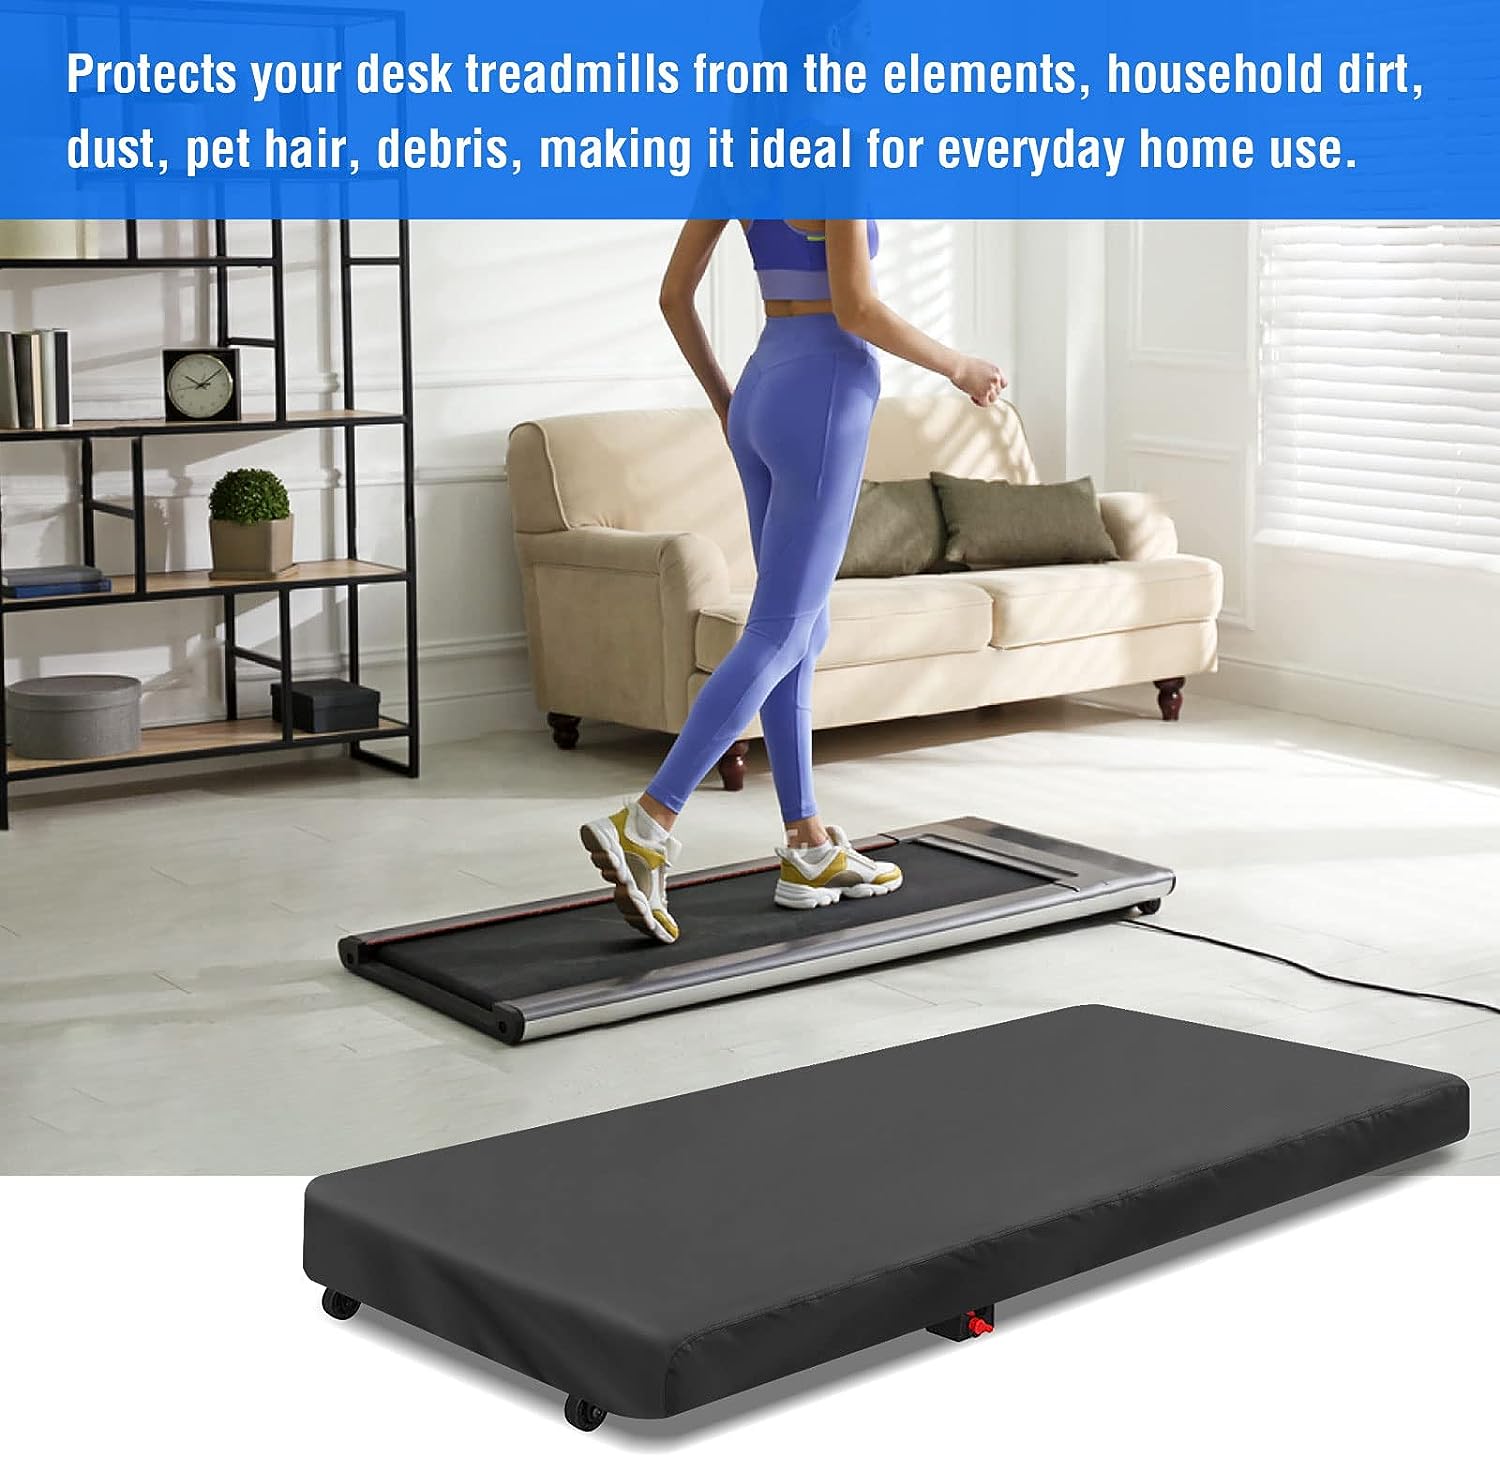 Aidetech Under Desk Treadmill Cover, Dust-Proof Walking Pad Cover, Waterproof Protective Cover for Walking Treadmill Office Under Desk(Black,)